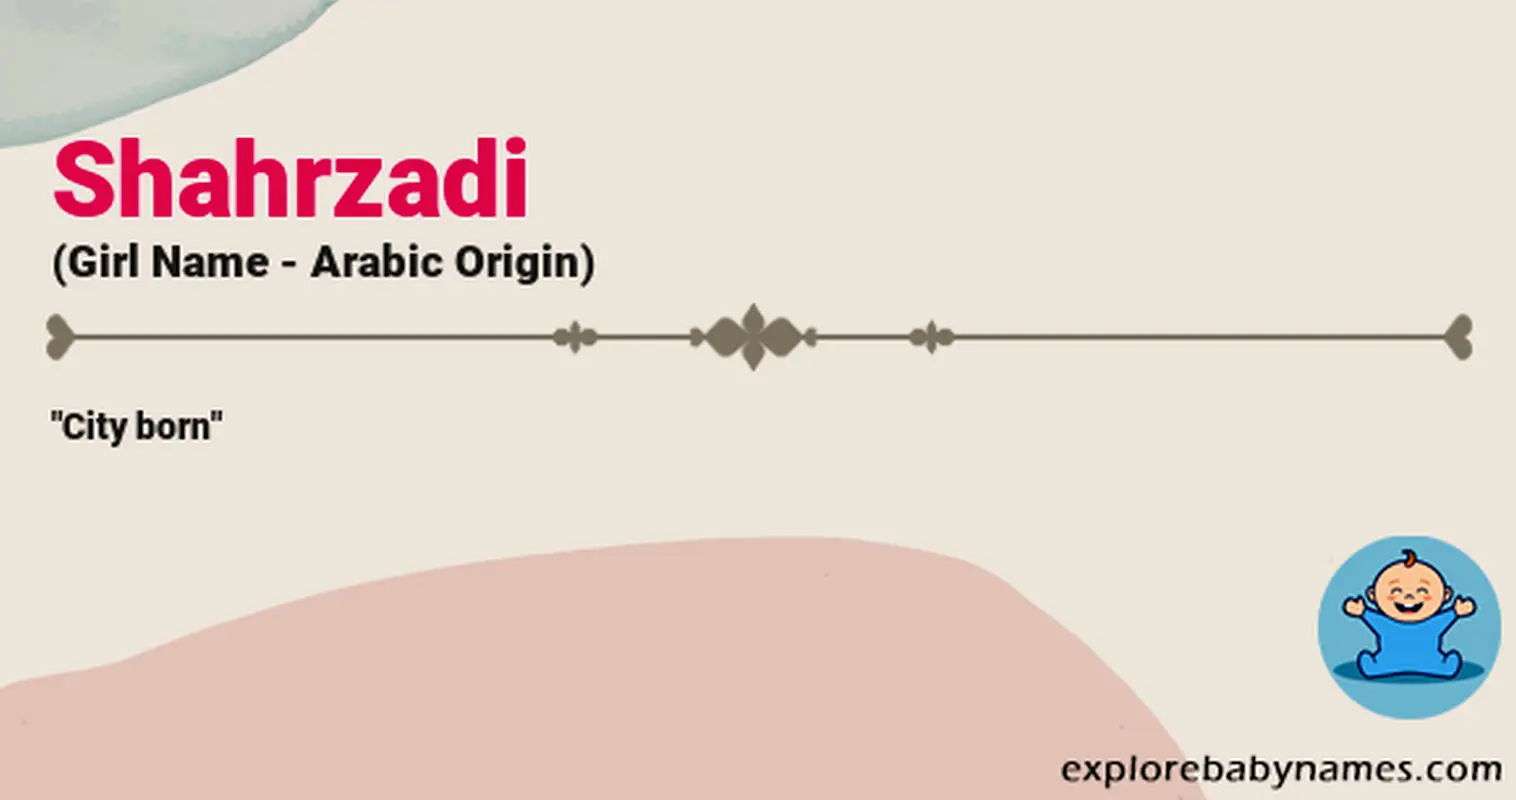 Meaning of Shahrzadi